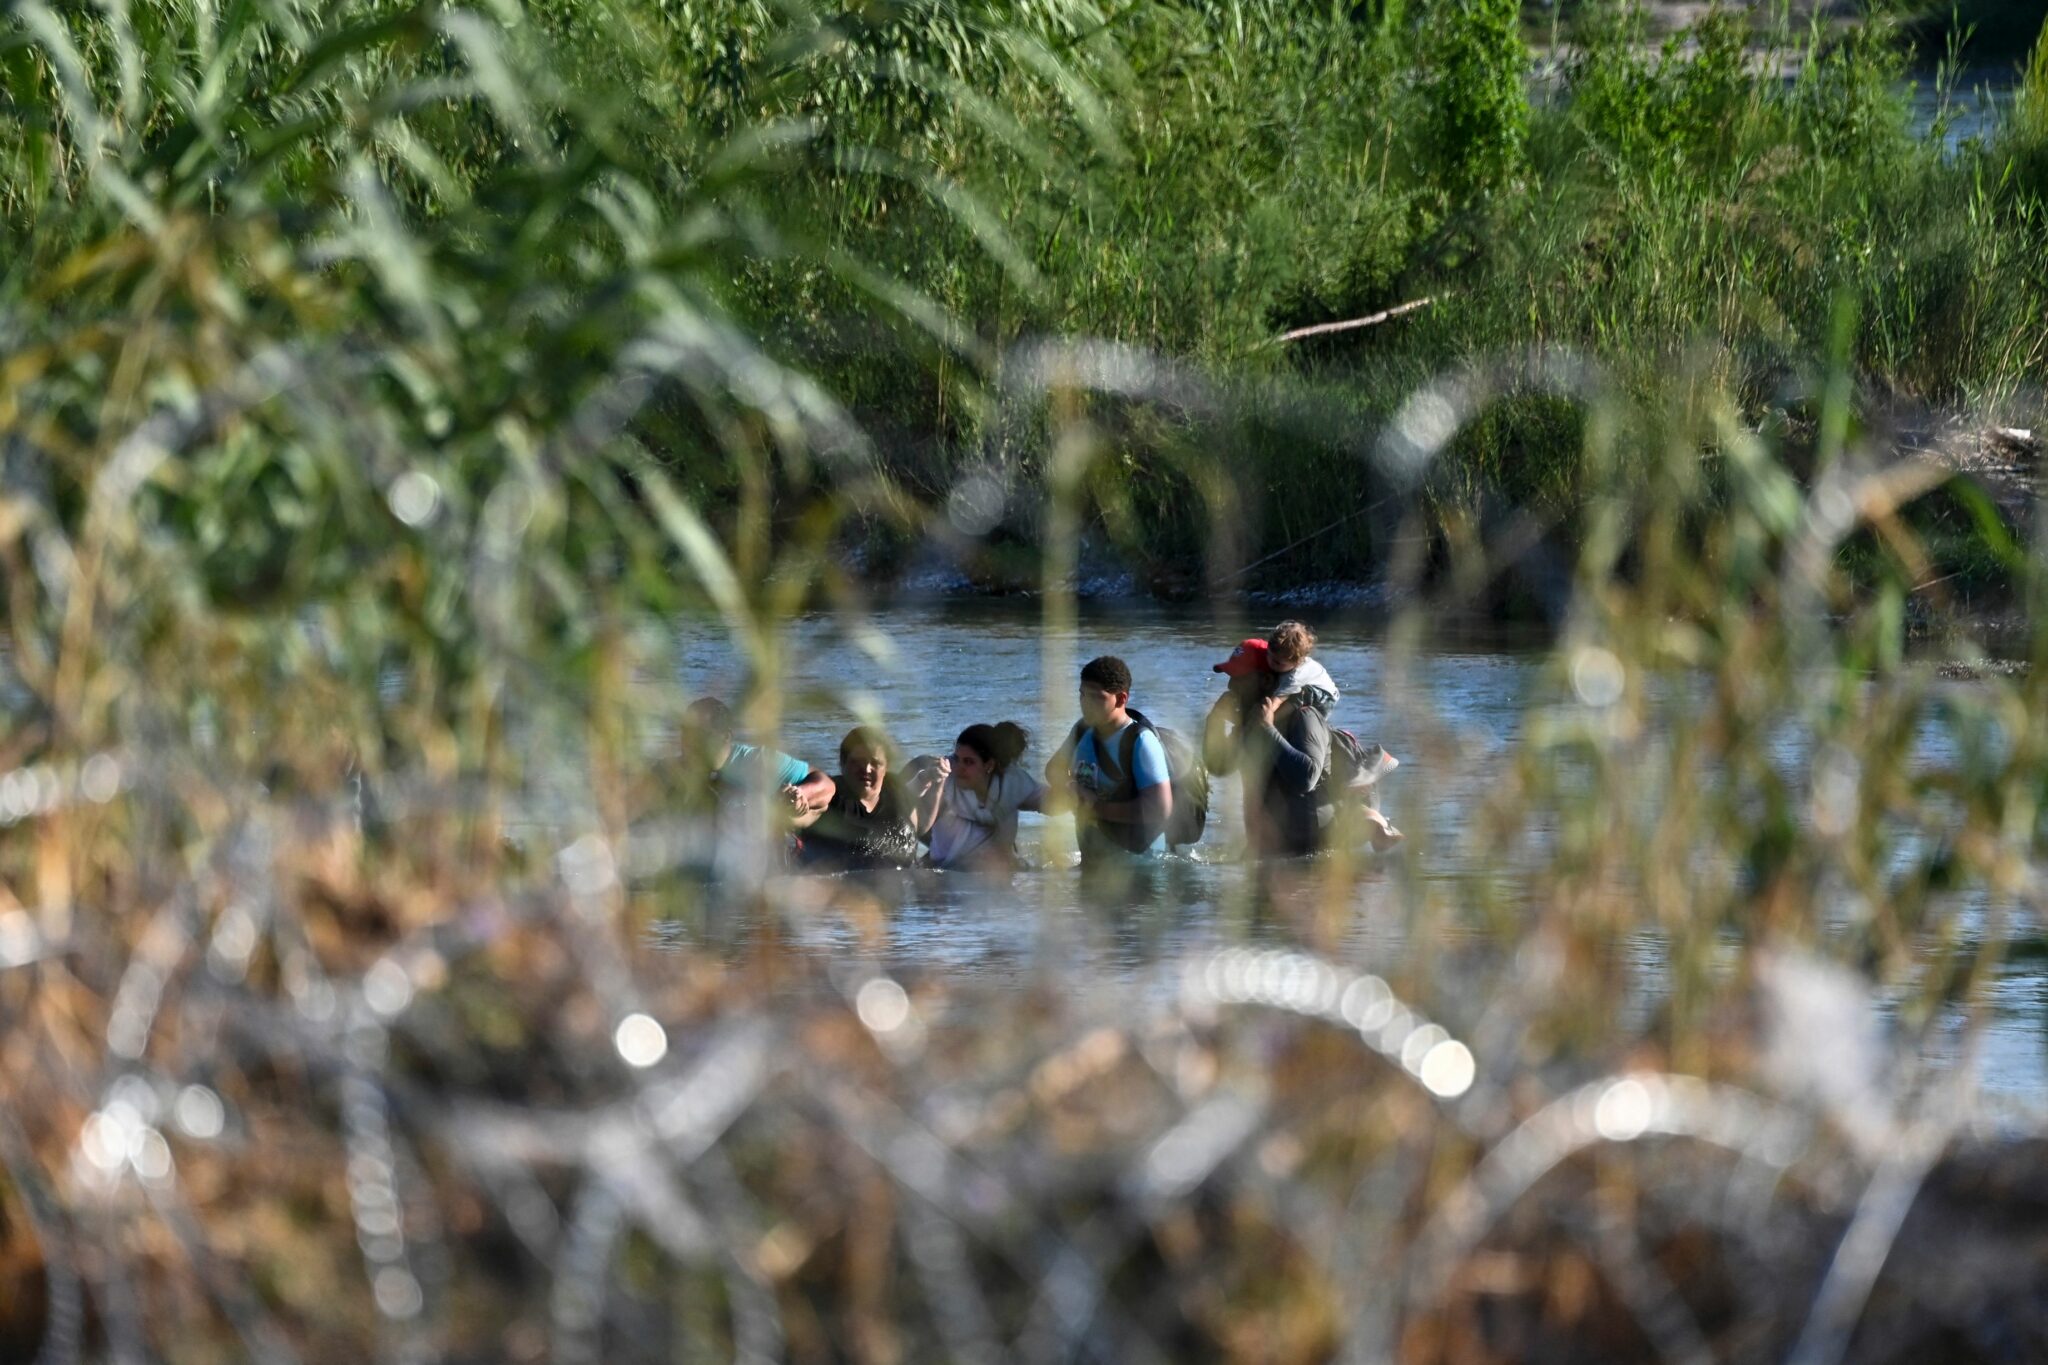 TOPSHOT - A migrant family from Venezuela is seen beyond concertina wire as they illegally cross the Rio Grande River in Eagle Pass, Texas, at the border with Mexico on June 30, 2022. - Every year, tens of thousands of migrants fleeing violence or poverty in Central and South America attempt to cross the border into the United States in pursuit of the American dream. Many never make it. On June 27, around 53 migrants were found dead in and around a truck abandoned in sweltering heat near the Texas city of San Antonio, in one of the worst disasters on the illegal migrant trail. (Photo by CHANDAN KHANNA / AFP) (Photo by CHANDAN KHANNA/AFP via Getty Images)